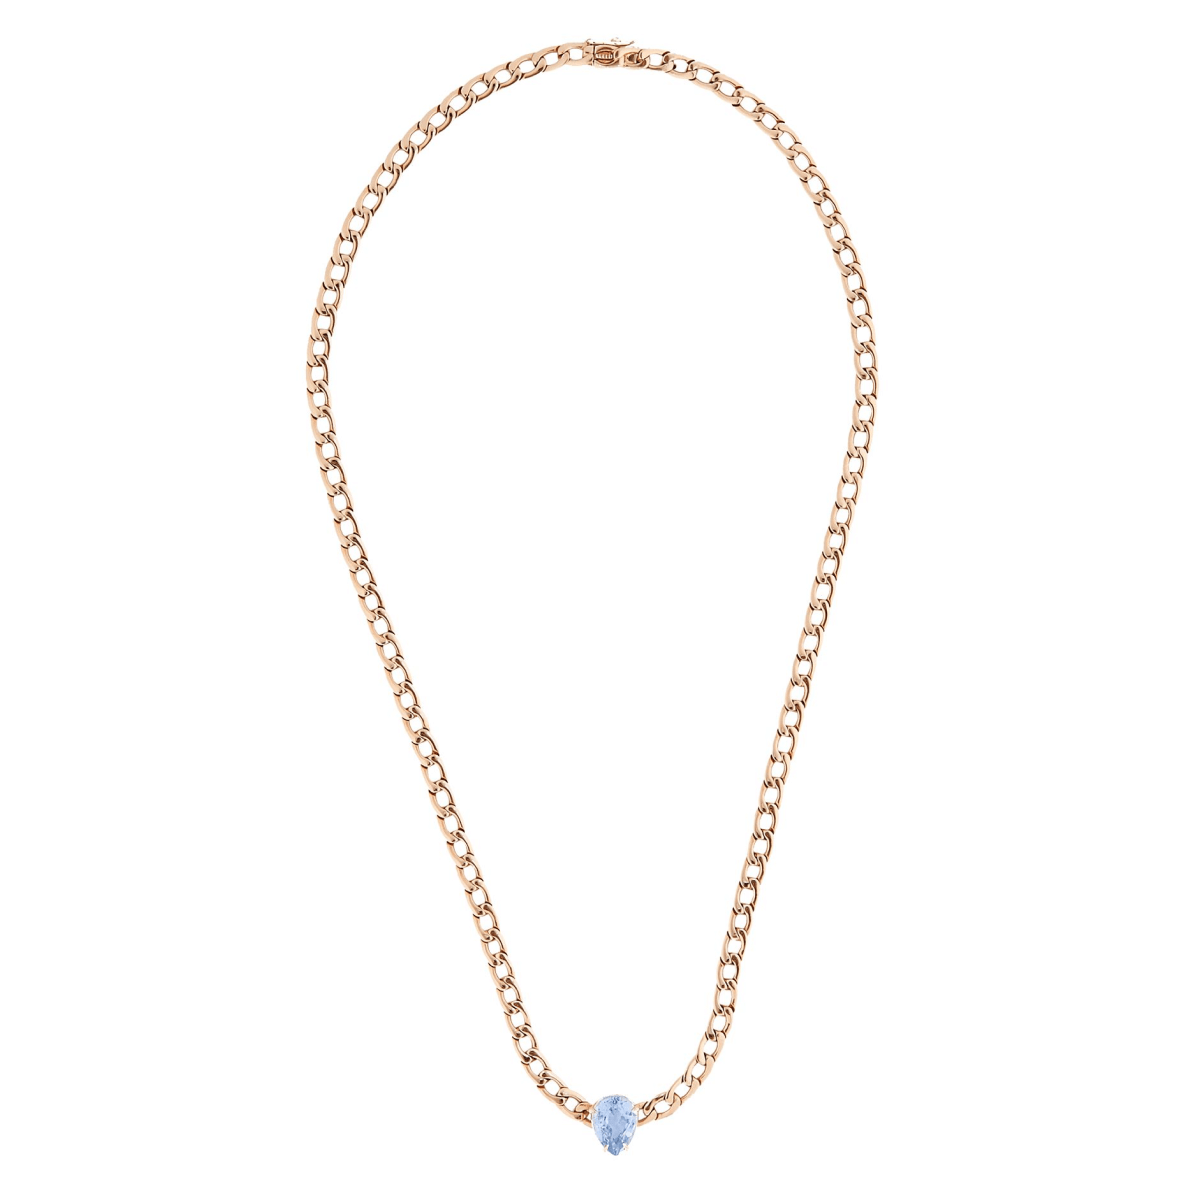 Anita Ko 18K Gold Chain Necklace with Sapphire